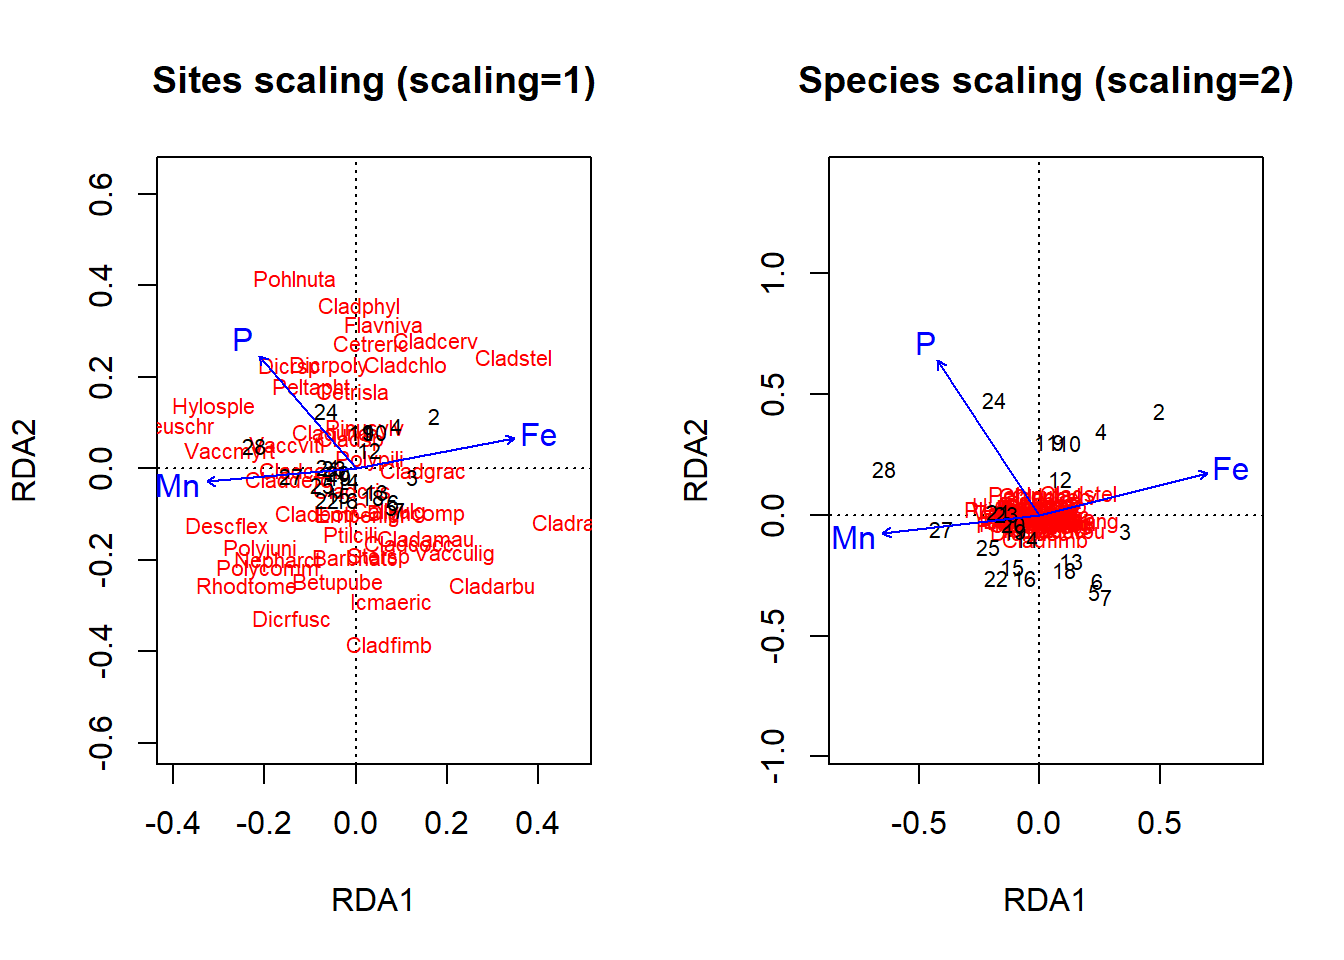 Two plots each with with y-axis labelled 'RDA2' and x-axis labelled 'RDA1' contains the variable names of the species in the varaspec dataset and site numbers respectively. Three arrows emerge from the center, 'P', 'Mn', and 'Fe'